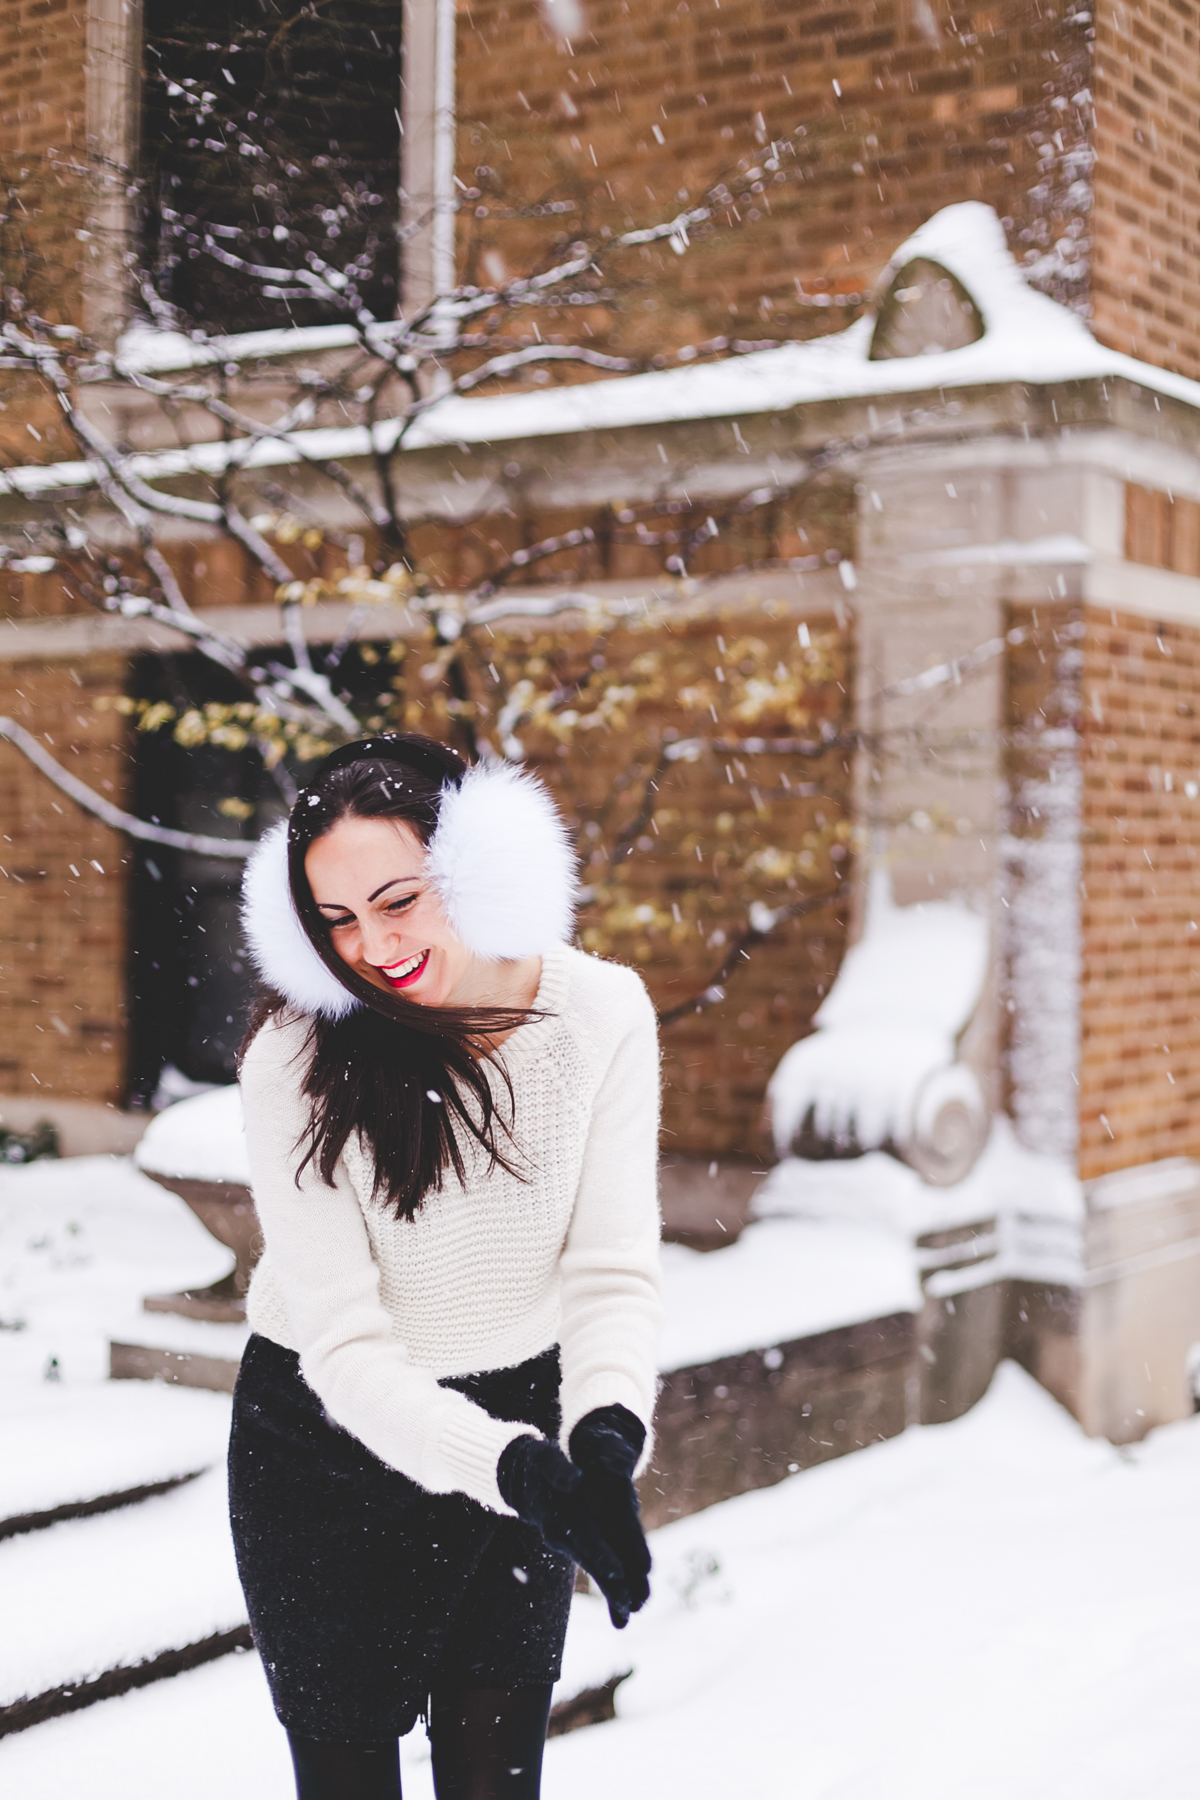 Yana Frigelis of NoMad Luxuries wearing fur earmuffs and a cozy cableknit sweater in the snow for the holidays 